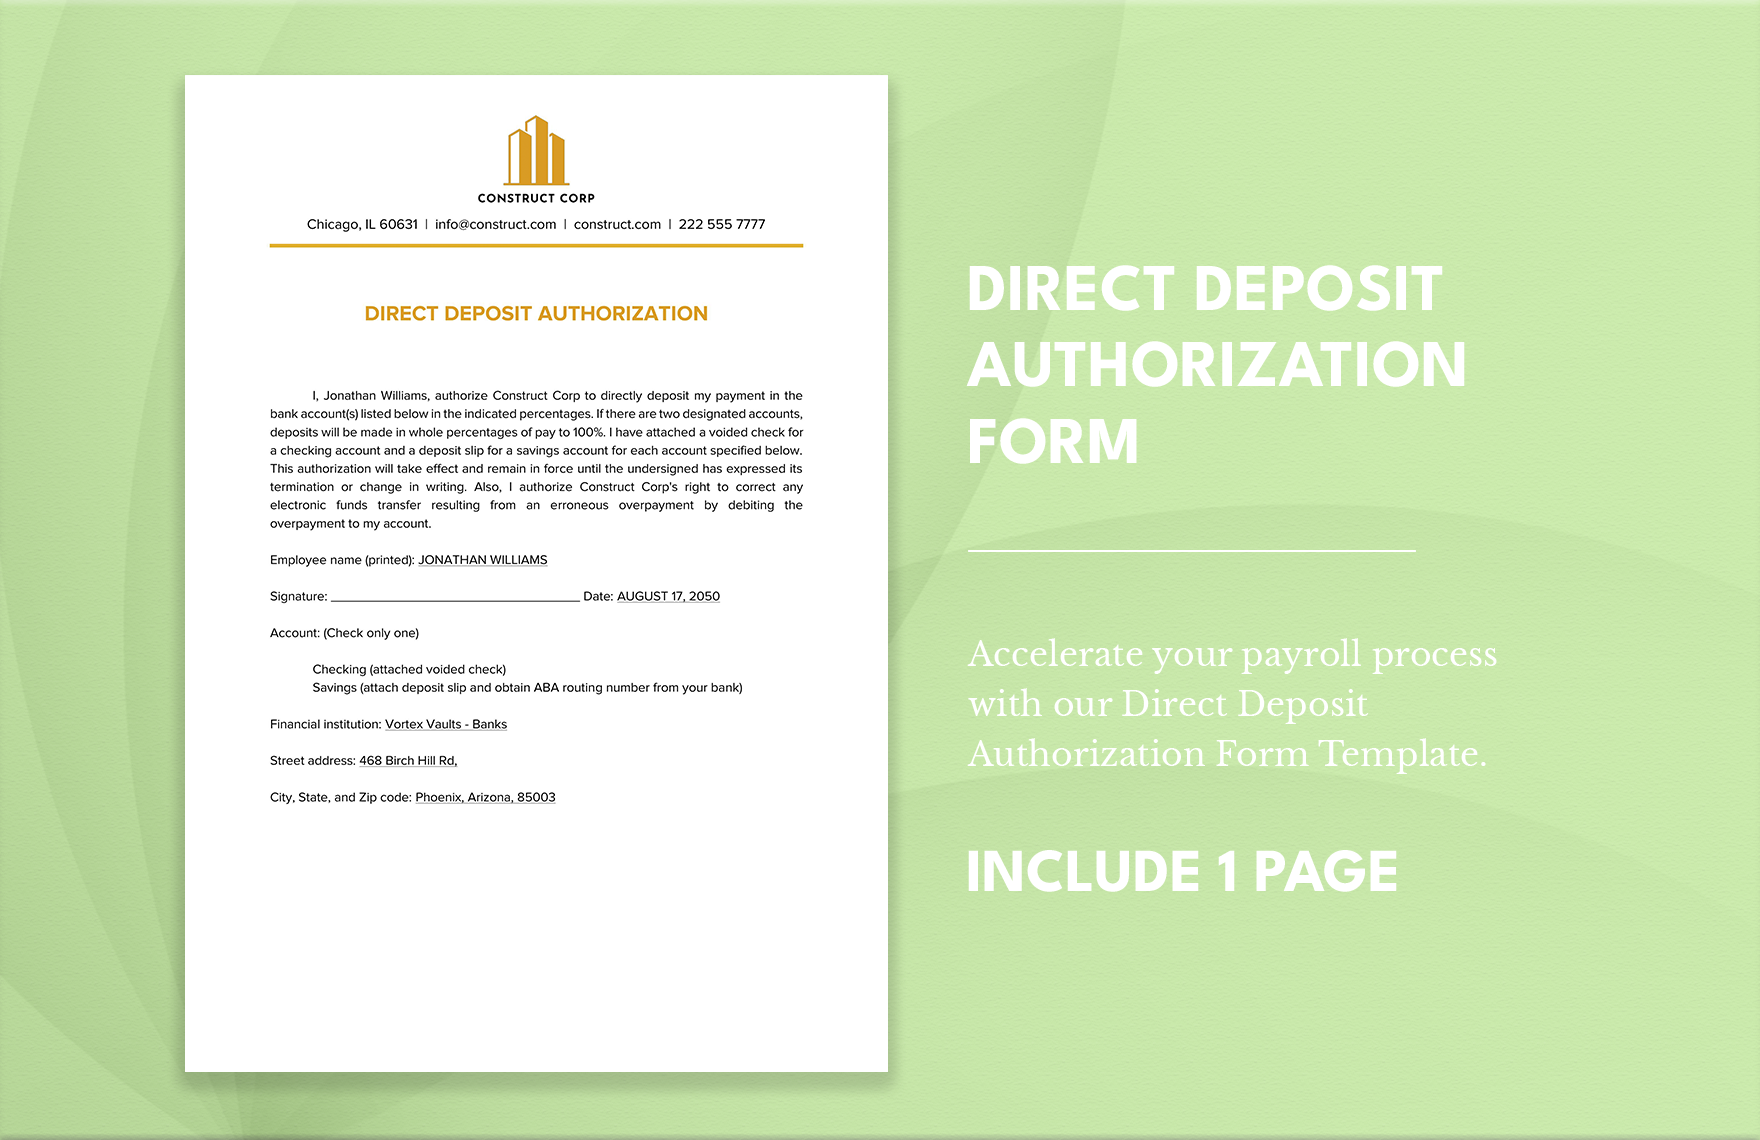 Direct Deposit Authorization Form in Word, Google Docs